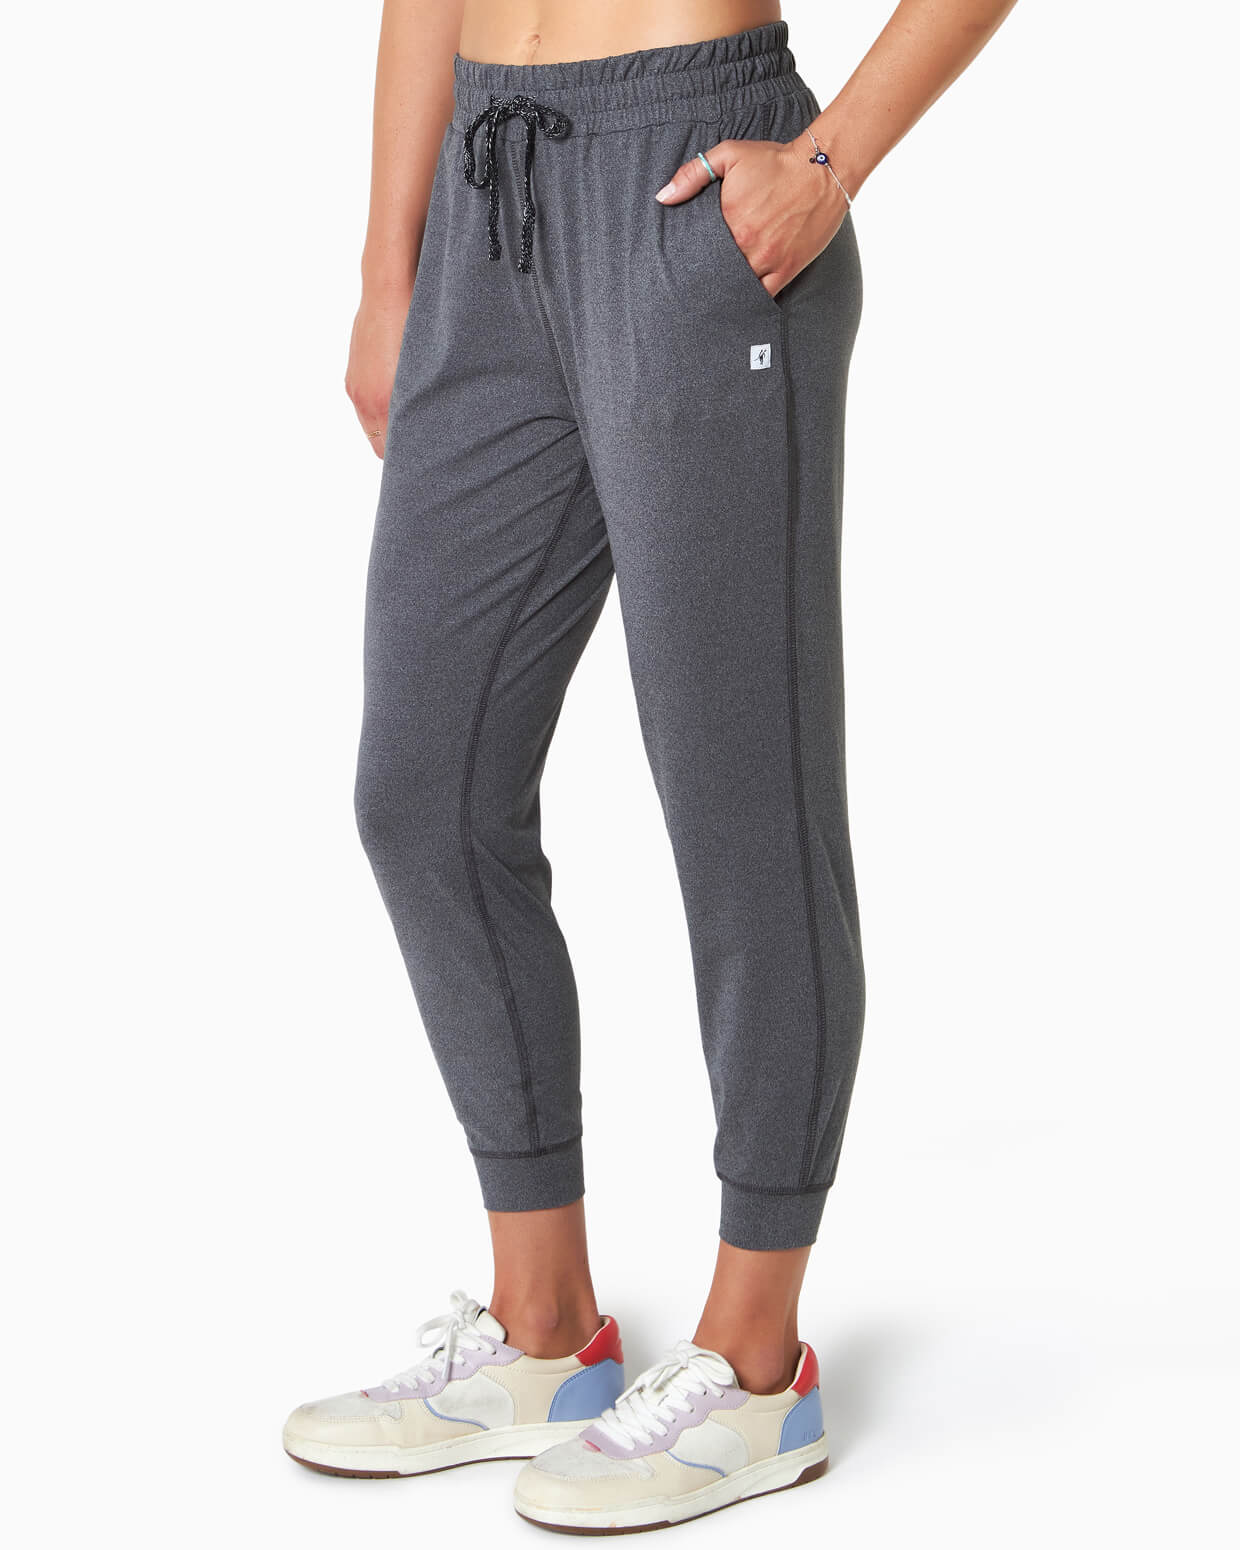  Champion French Terry Jogger Sweatpants, Women's